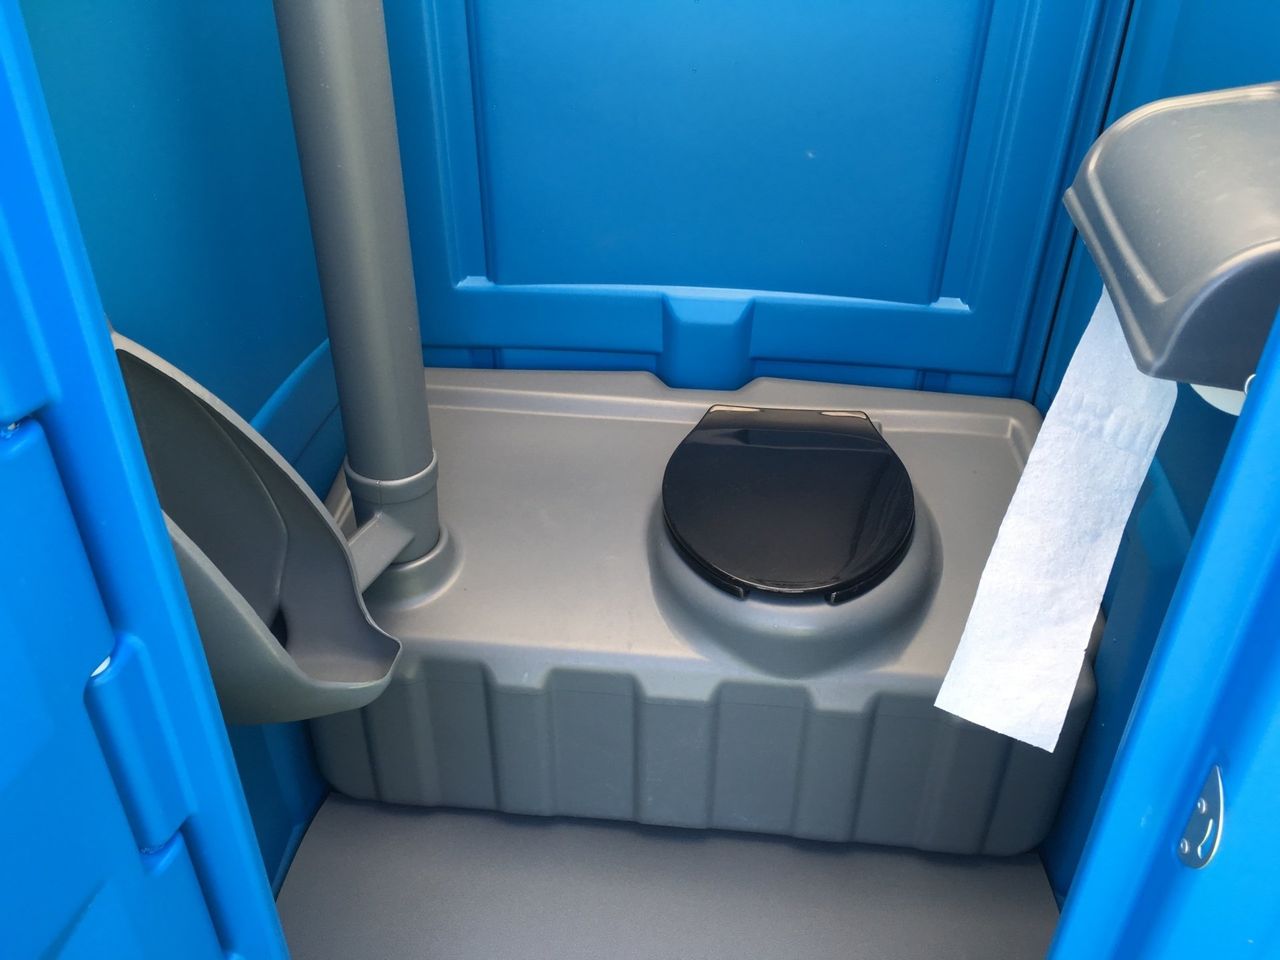 Seat, urinal and tissue - Sanitation Services in Mora, MN